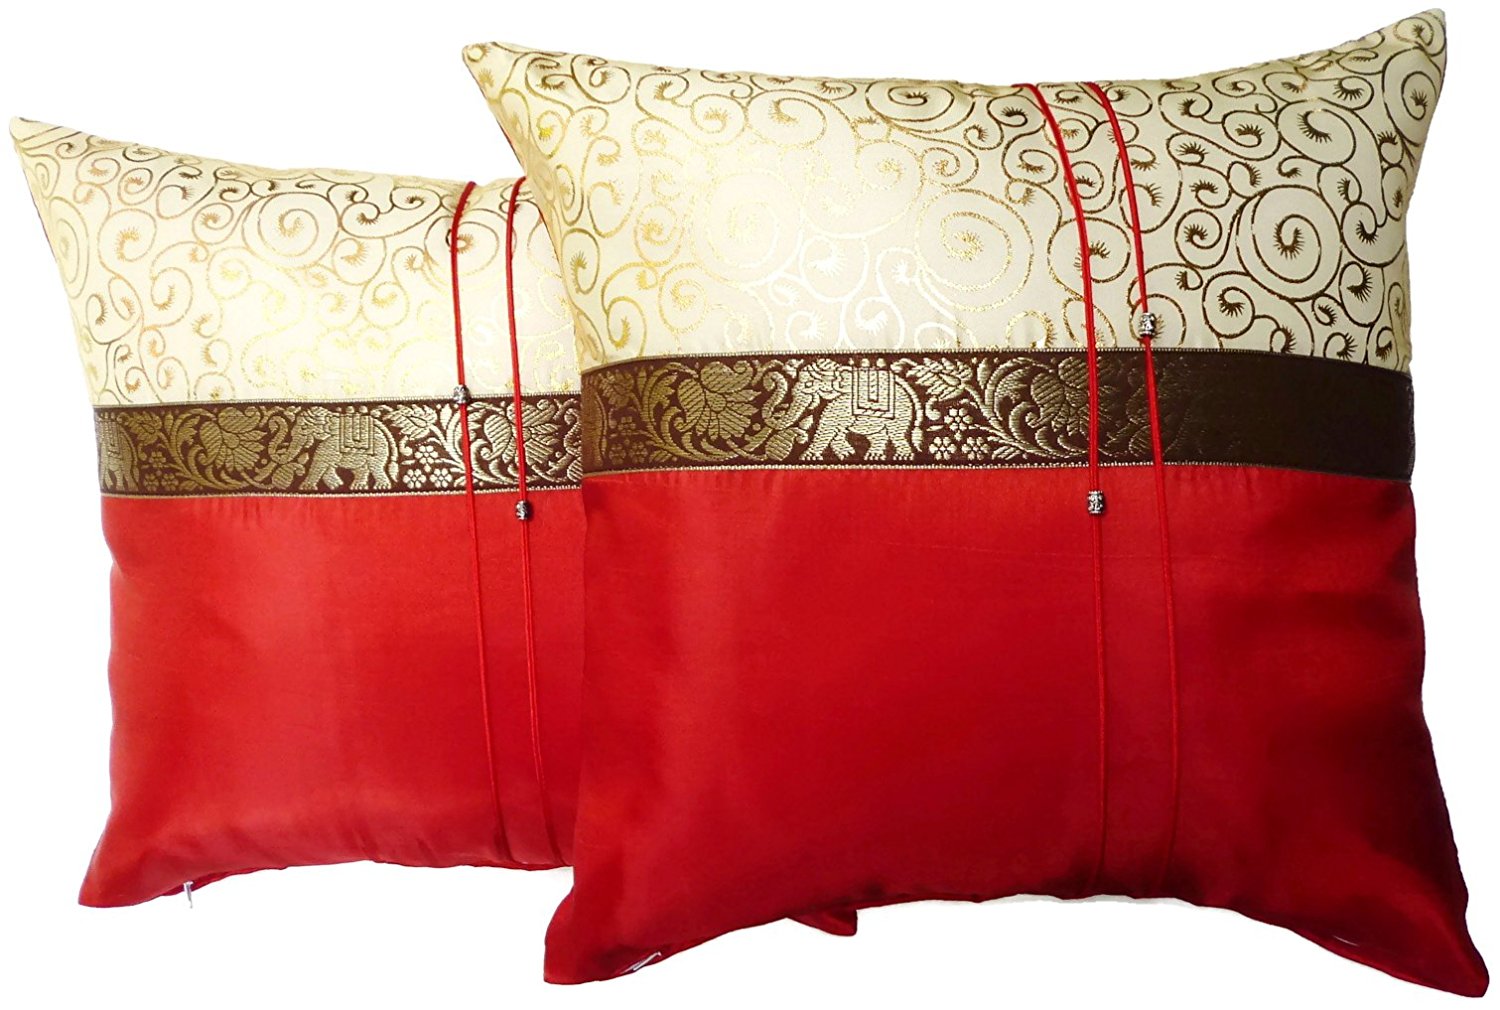 Set of Two Aurora Red Silk Throw Cushion Pillow Cover Case With Elephant Middle Stripe for Decorative Living Room Sofa Car Size 16 x16 Inches